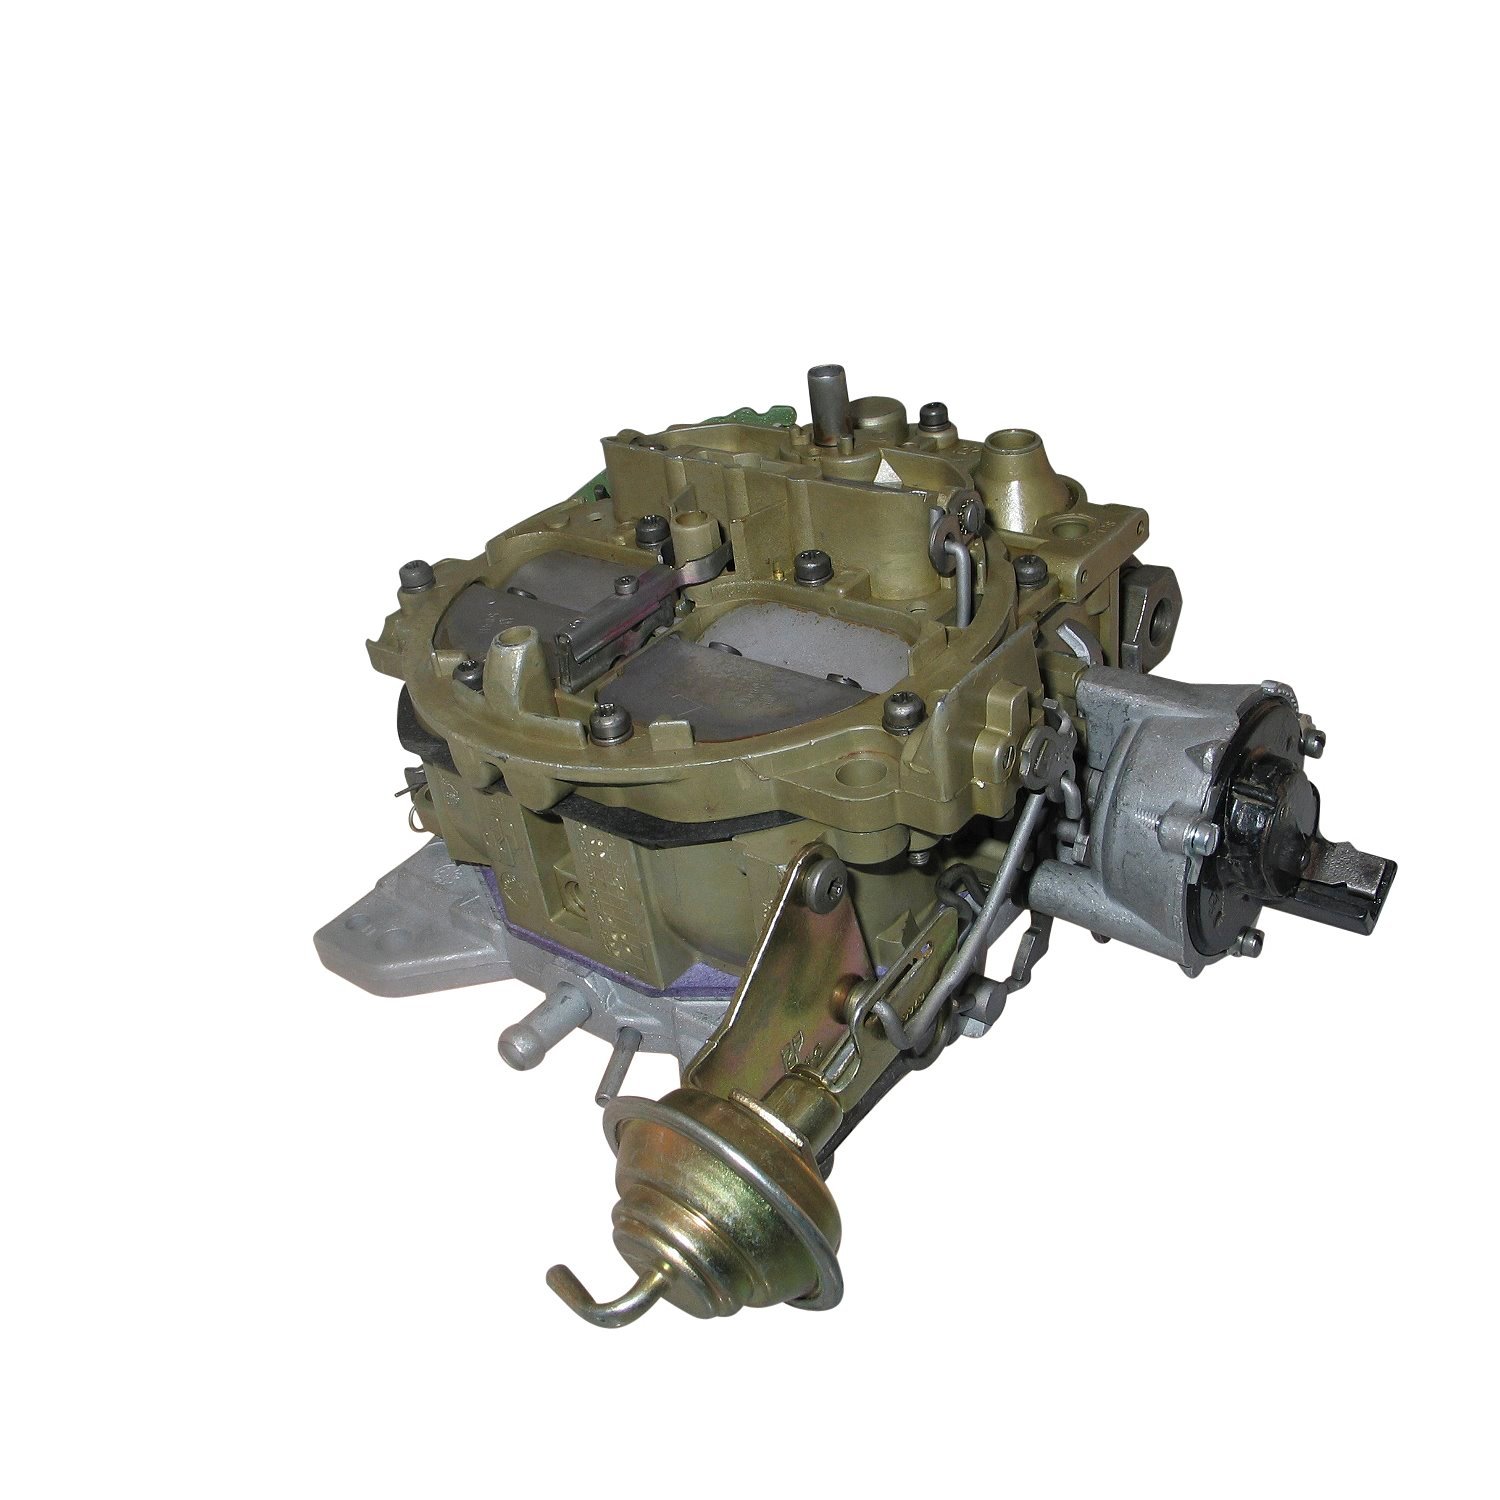 6-6325 Rochester Remanufactured Carburetor, M4ME, Heavy Duty-Style